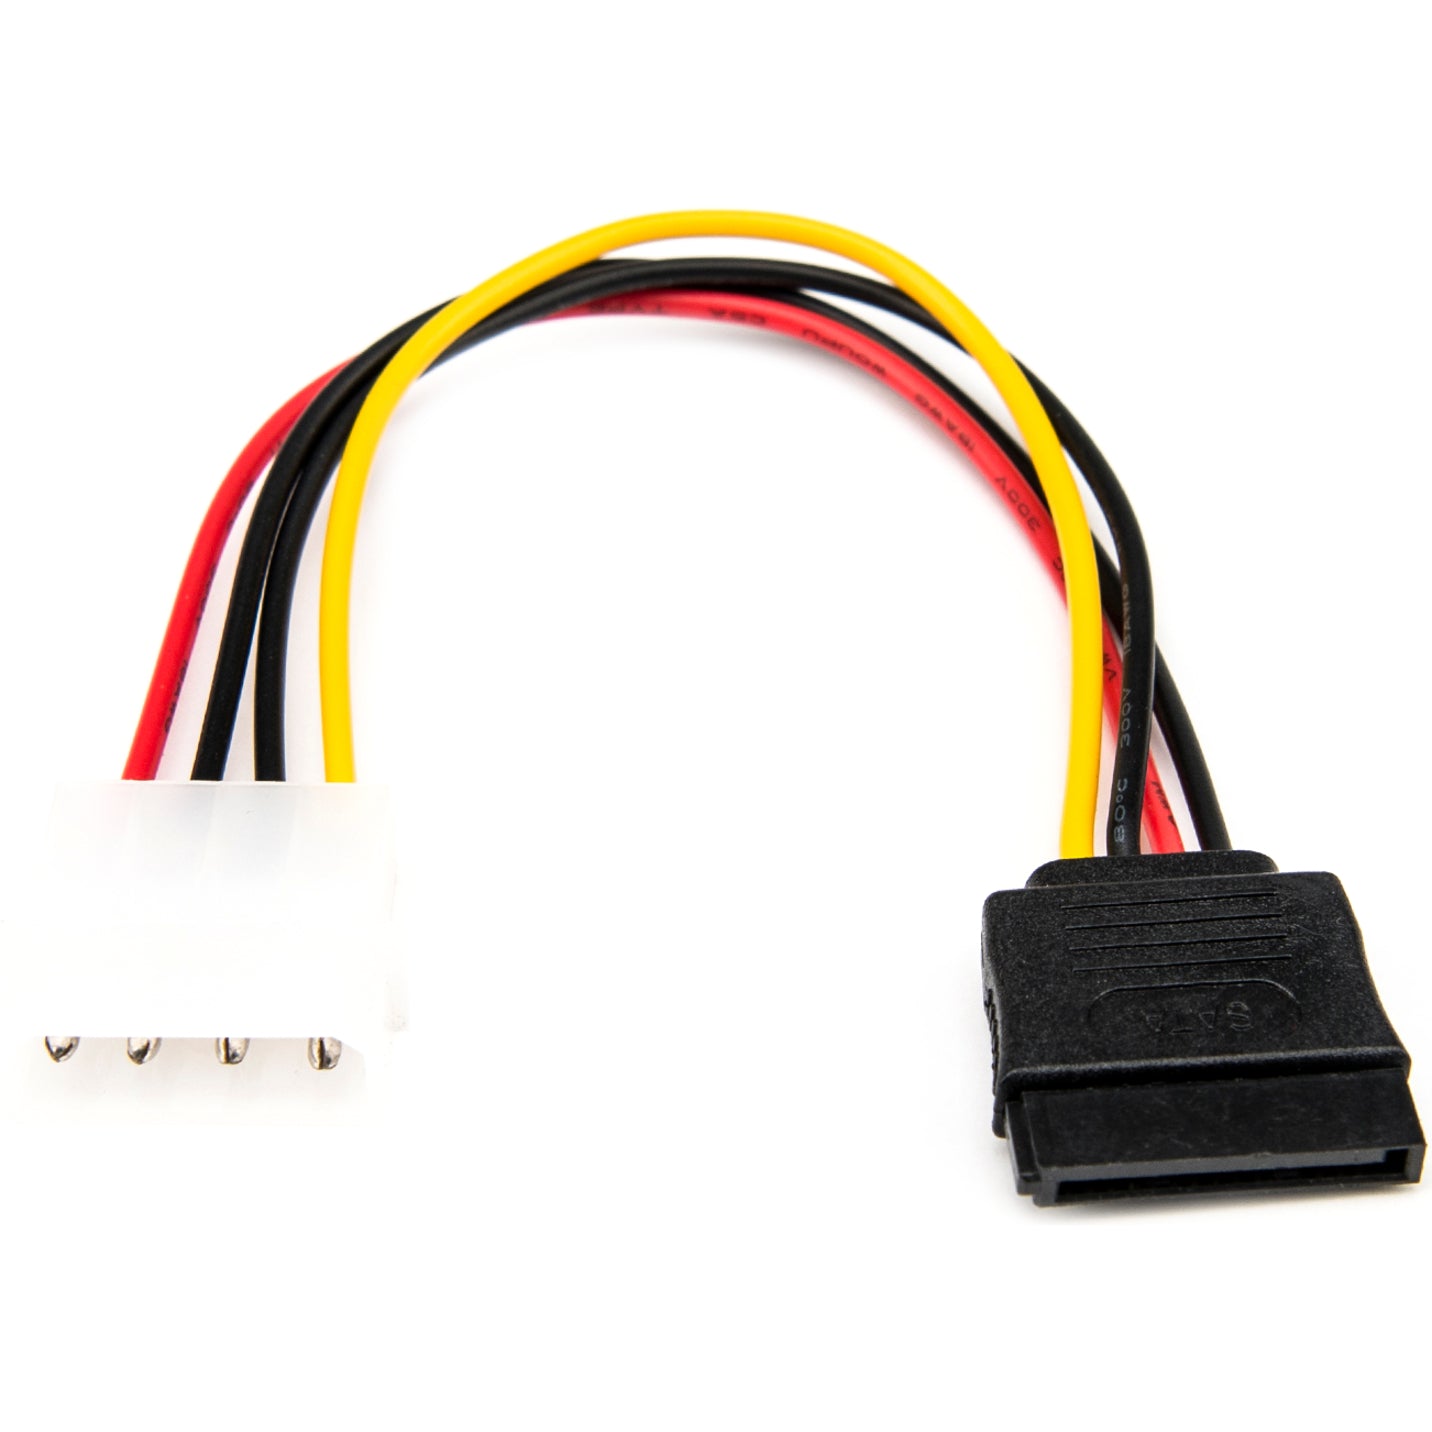 Rocstor Y10C214-B1 6in 4 Pin Molex to Left Angle SATA Power Cable Adapter, Data Transfer Cable